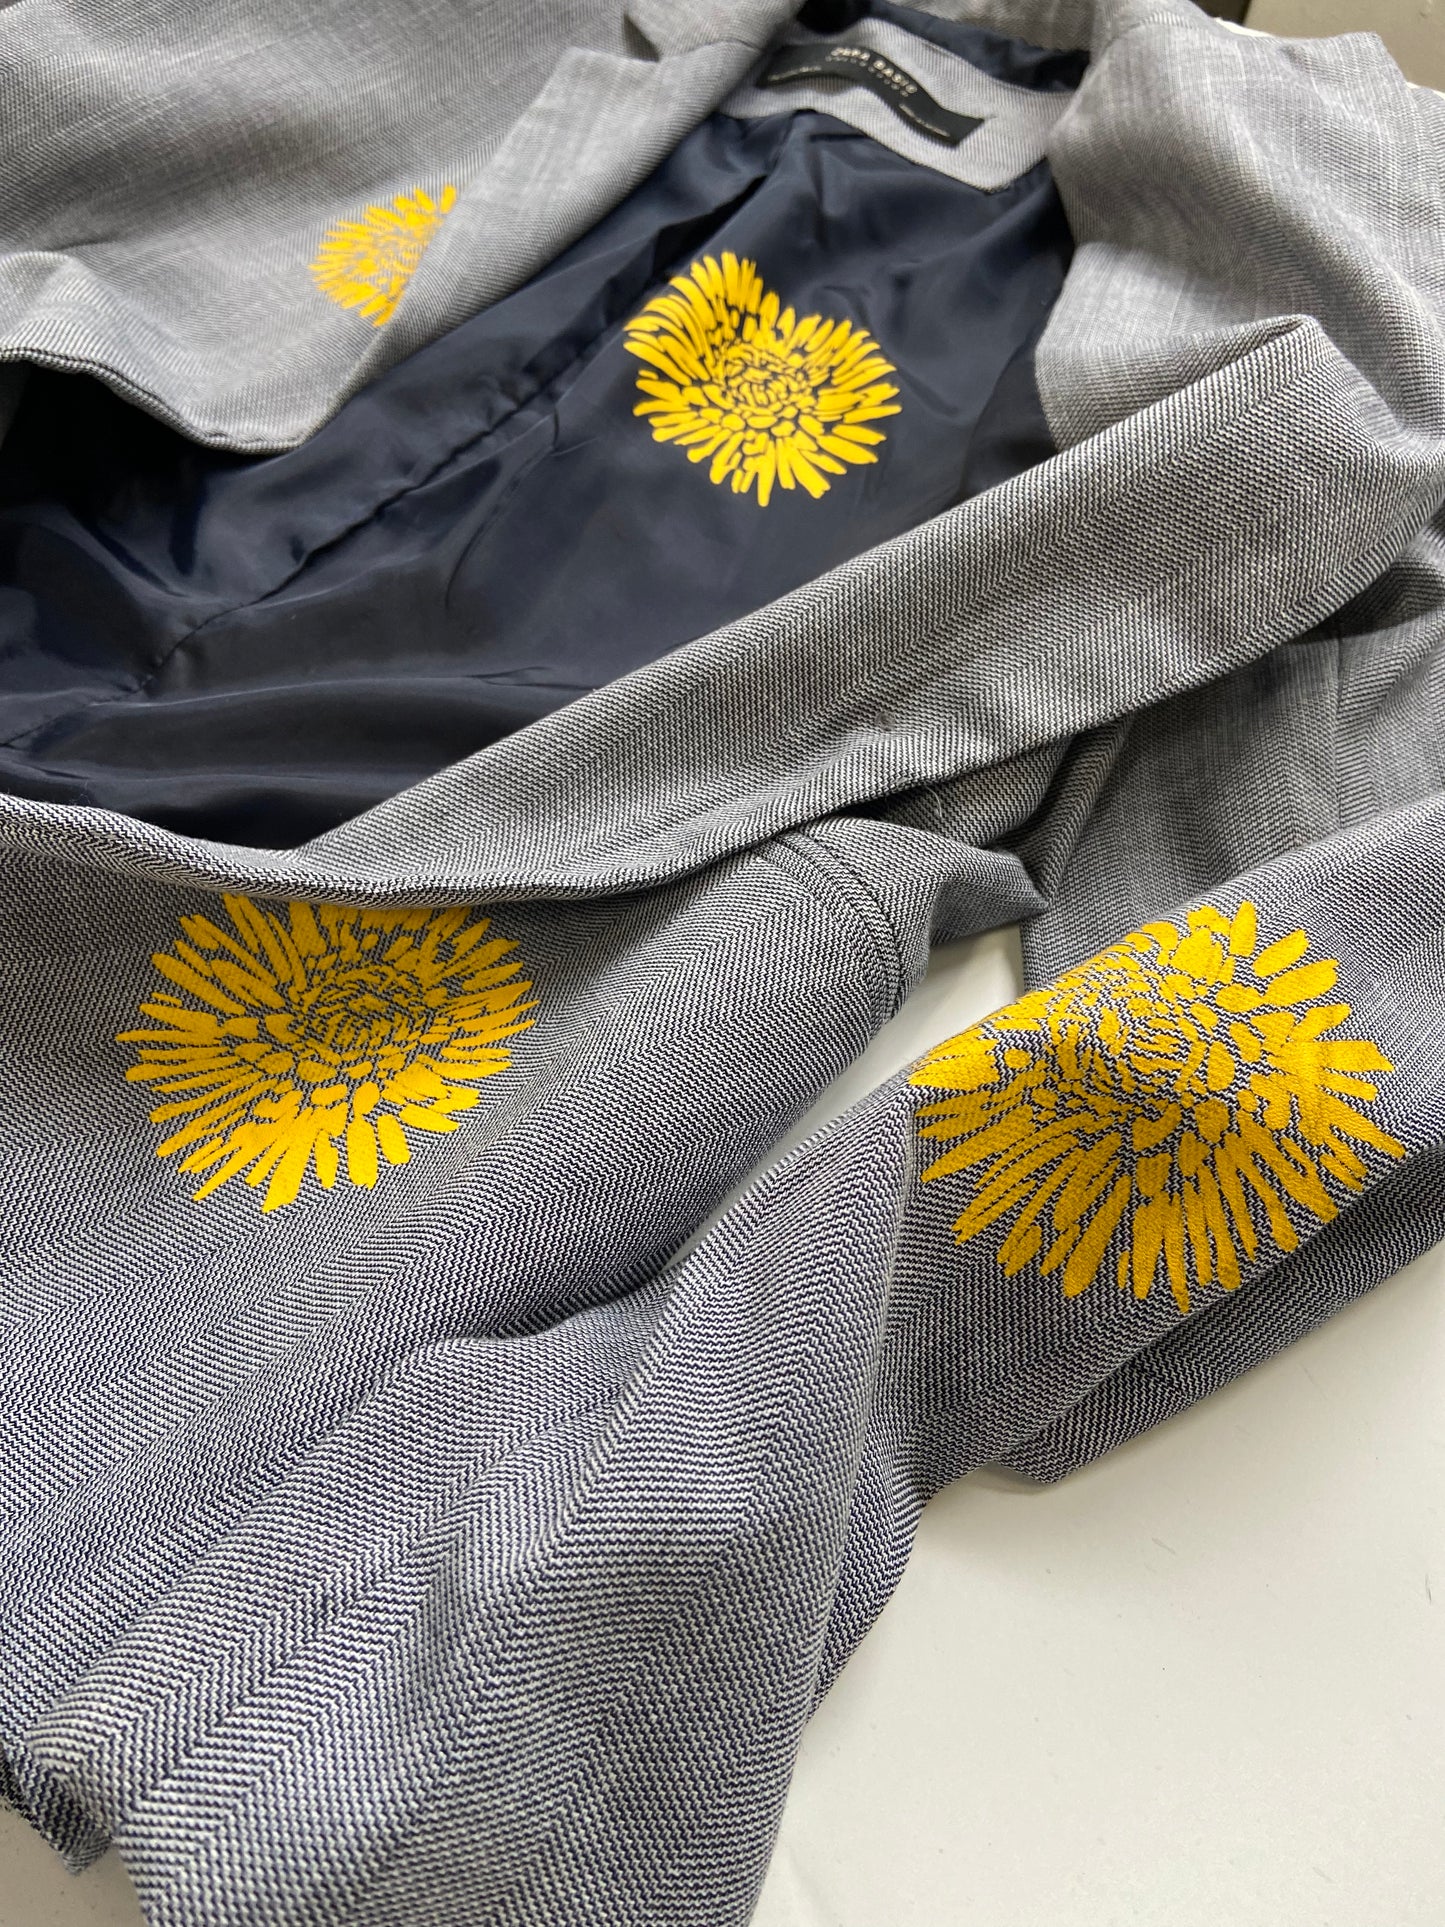 One of a Kind Upcycled Hand Printed Yellow Flowers on Blue/Grey Blazer